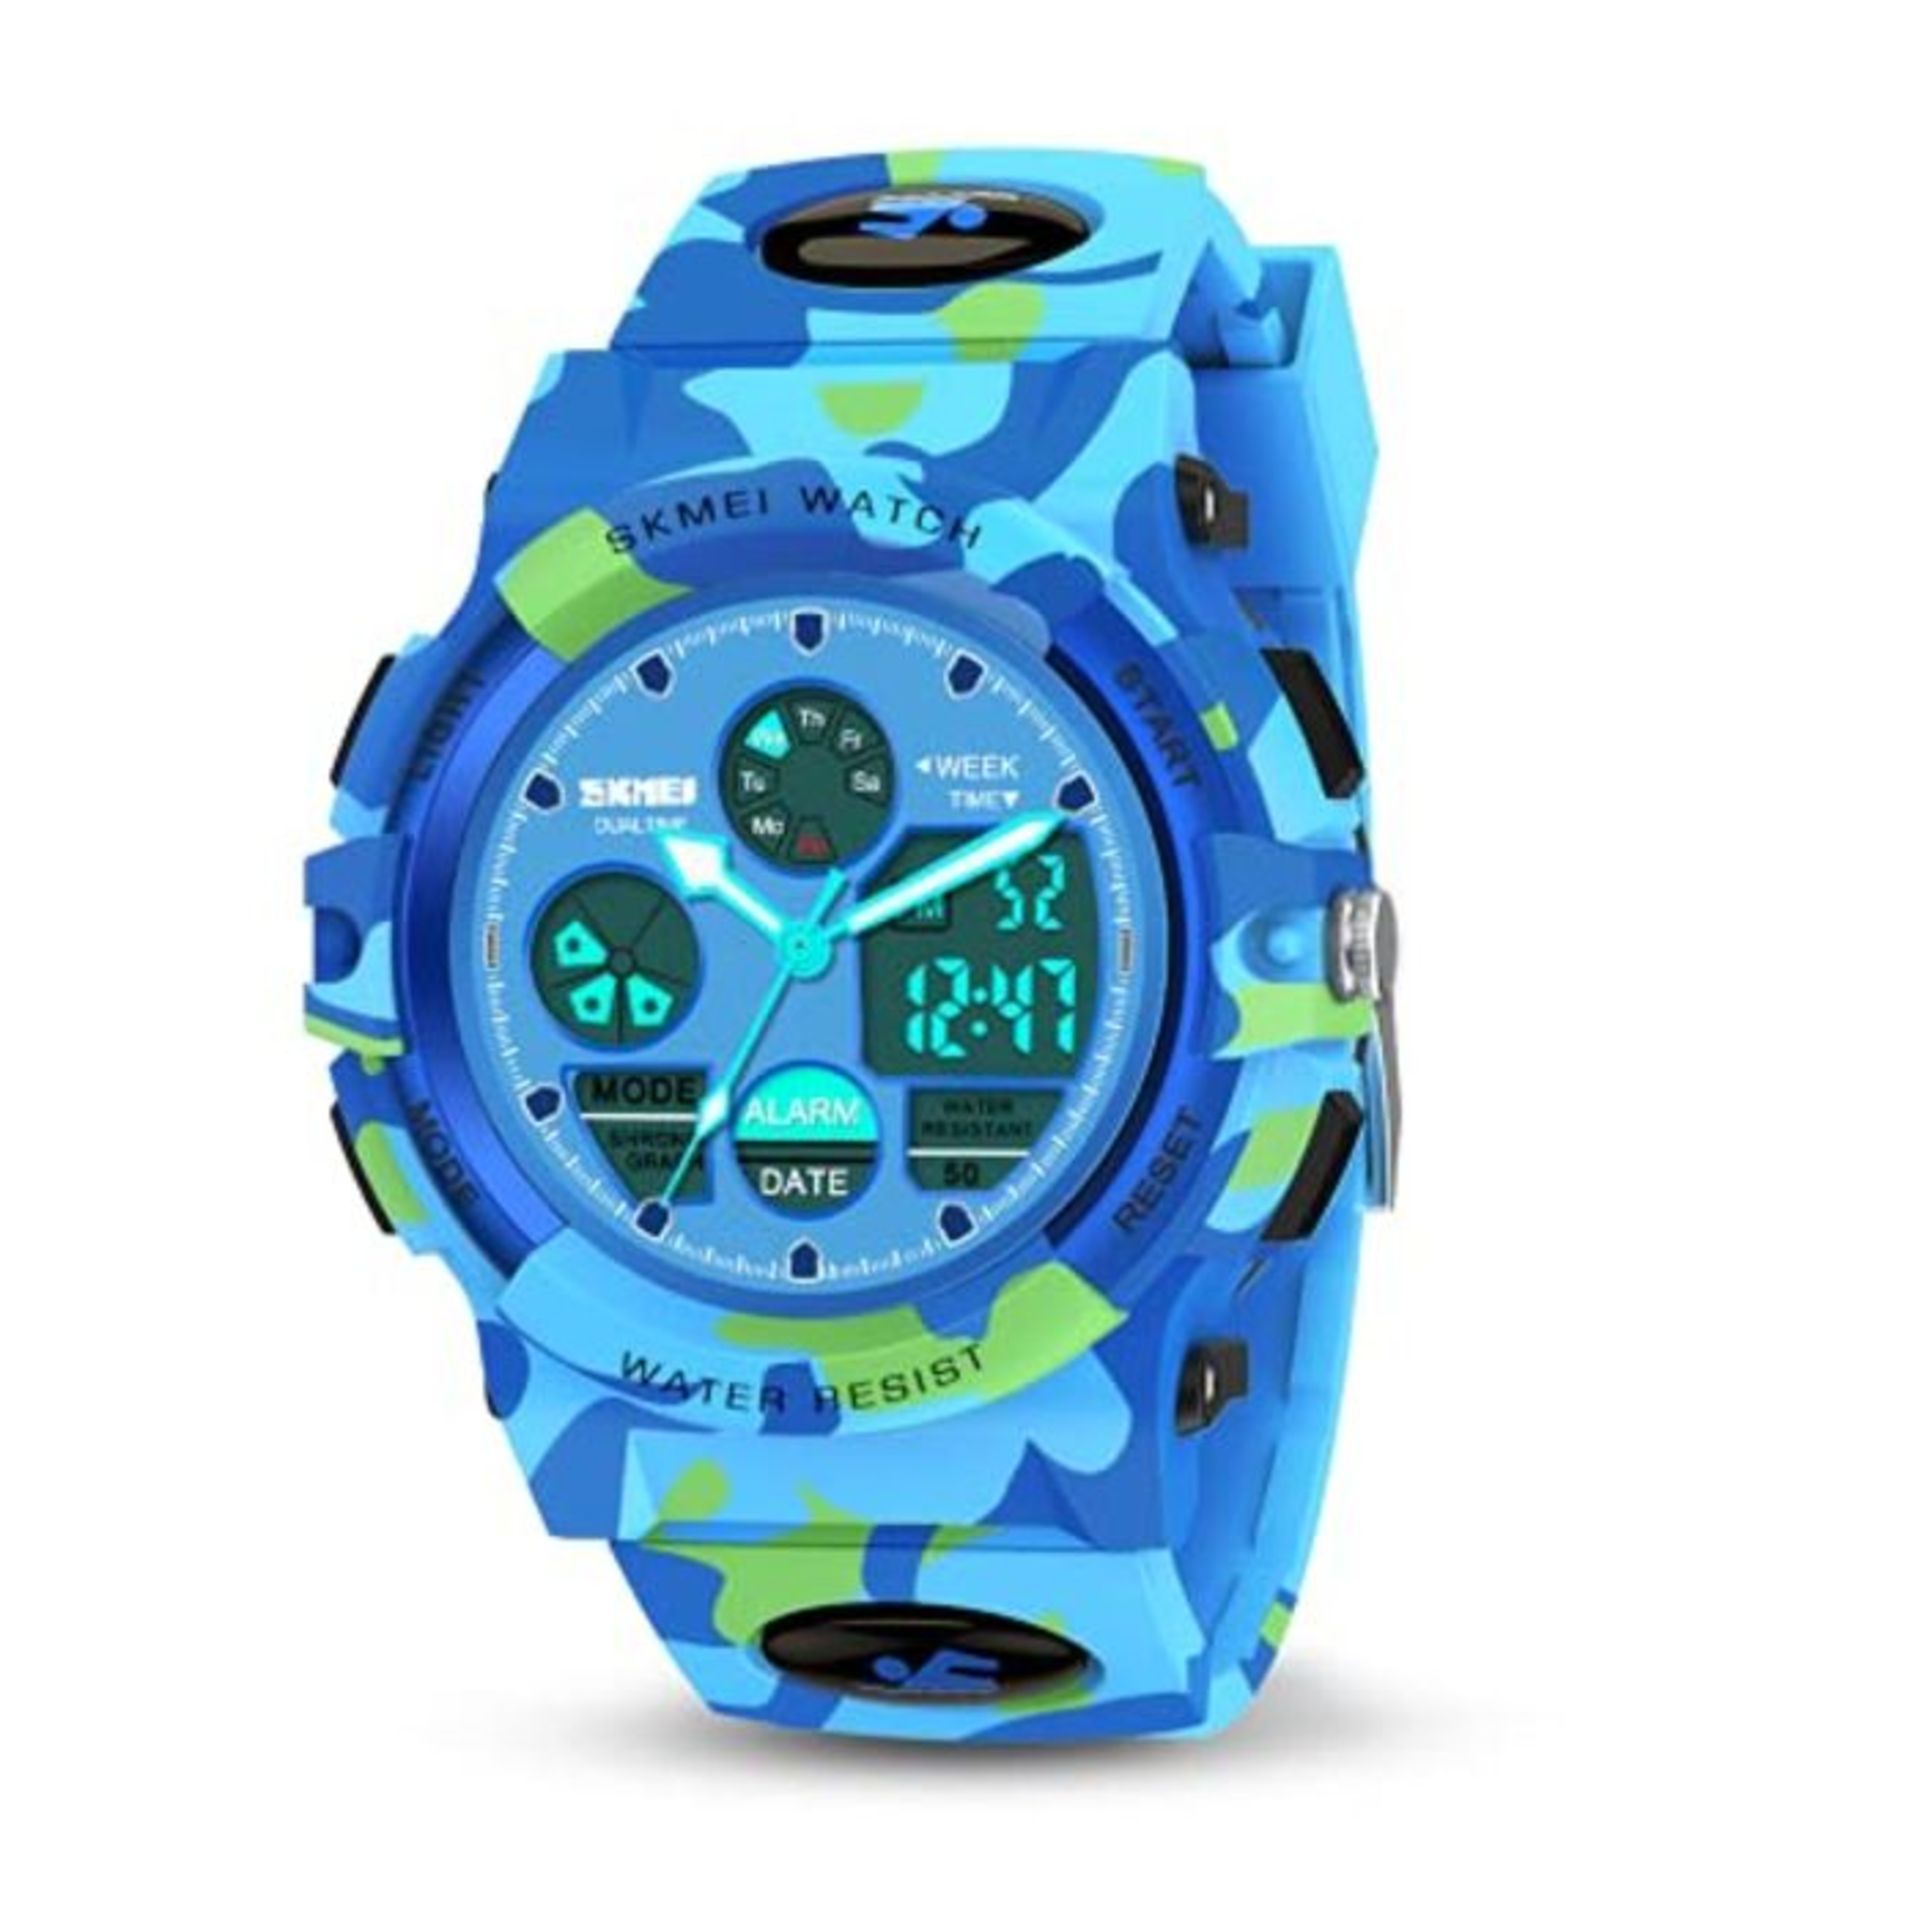 Toy zee kids Toys Age 6-15, Digital Watch Kids Gifts for 6-12 Year old kids Toys Gifts